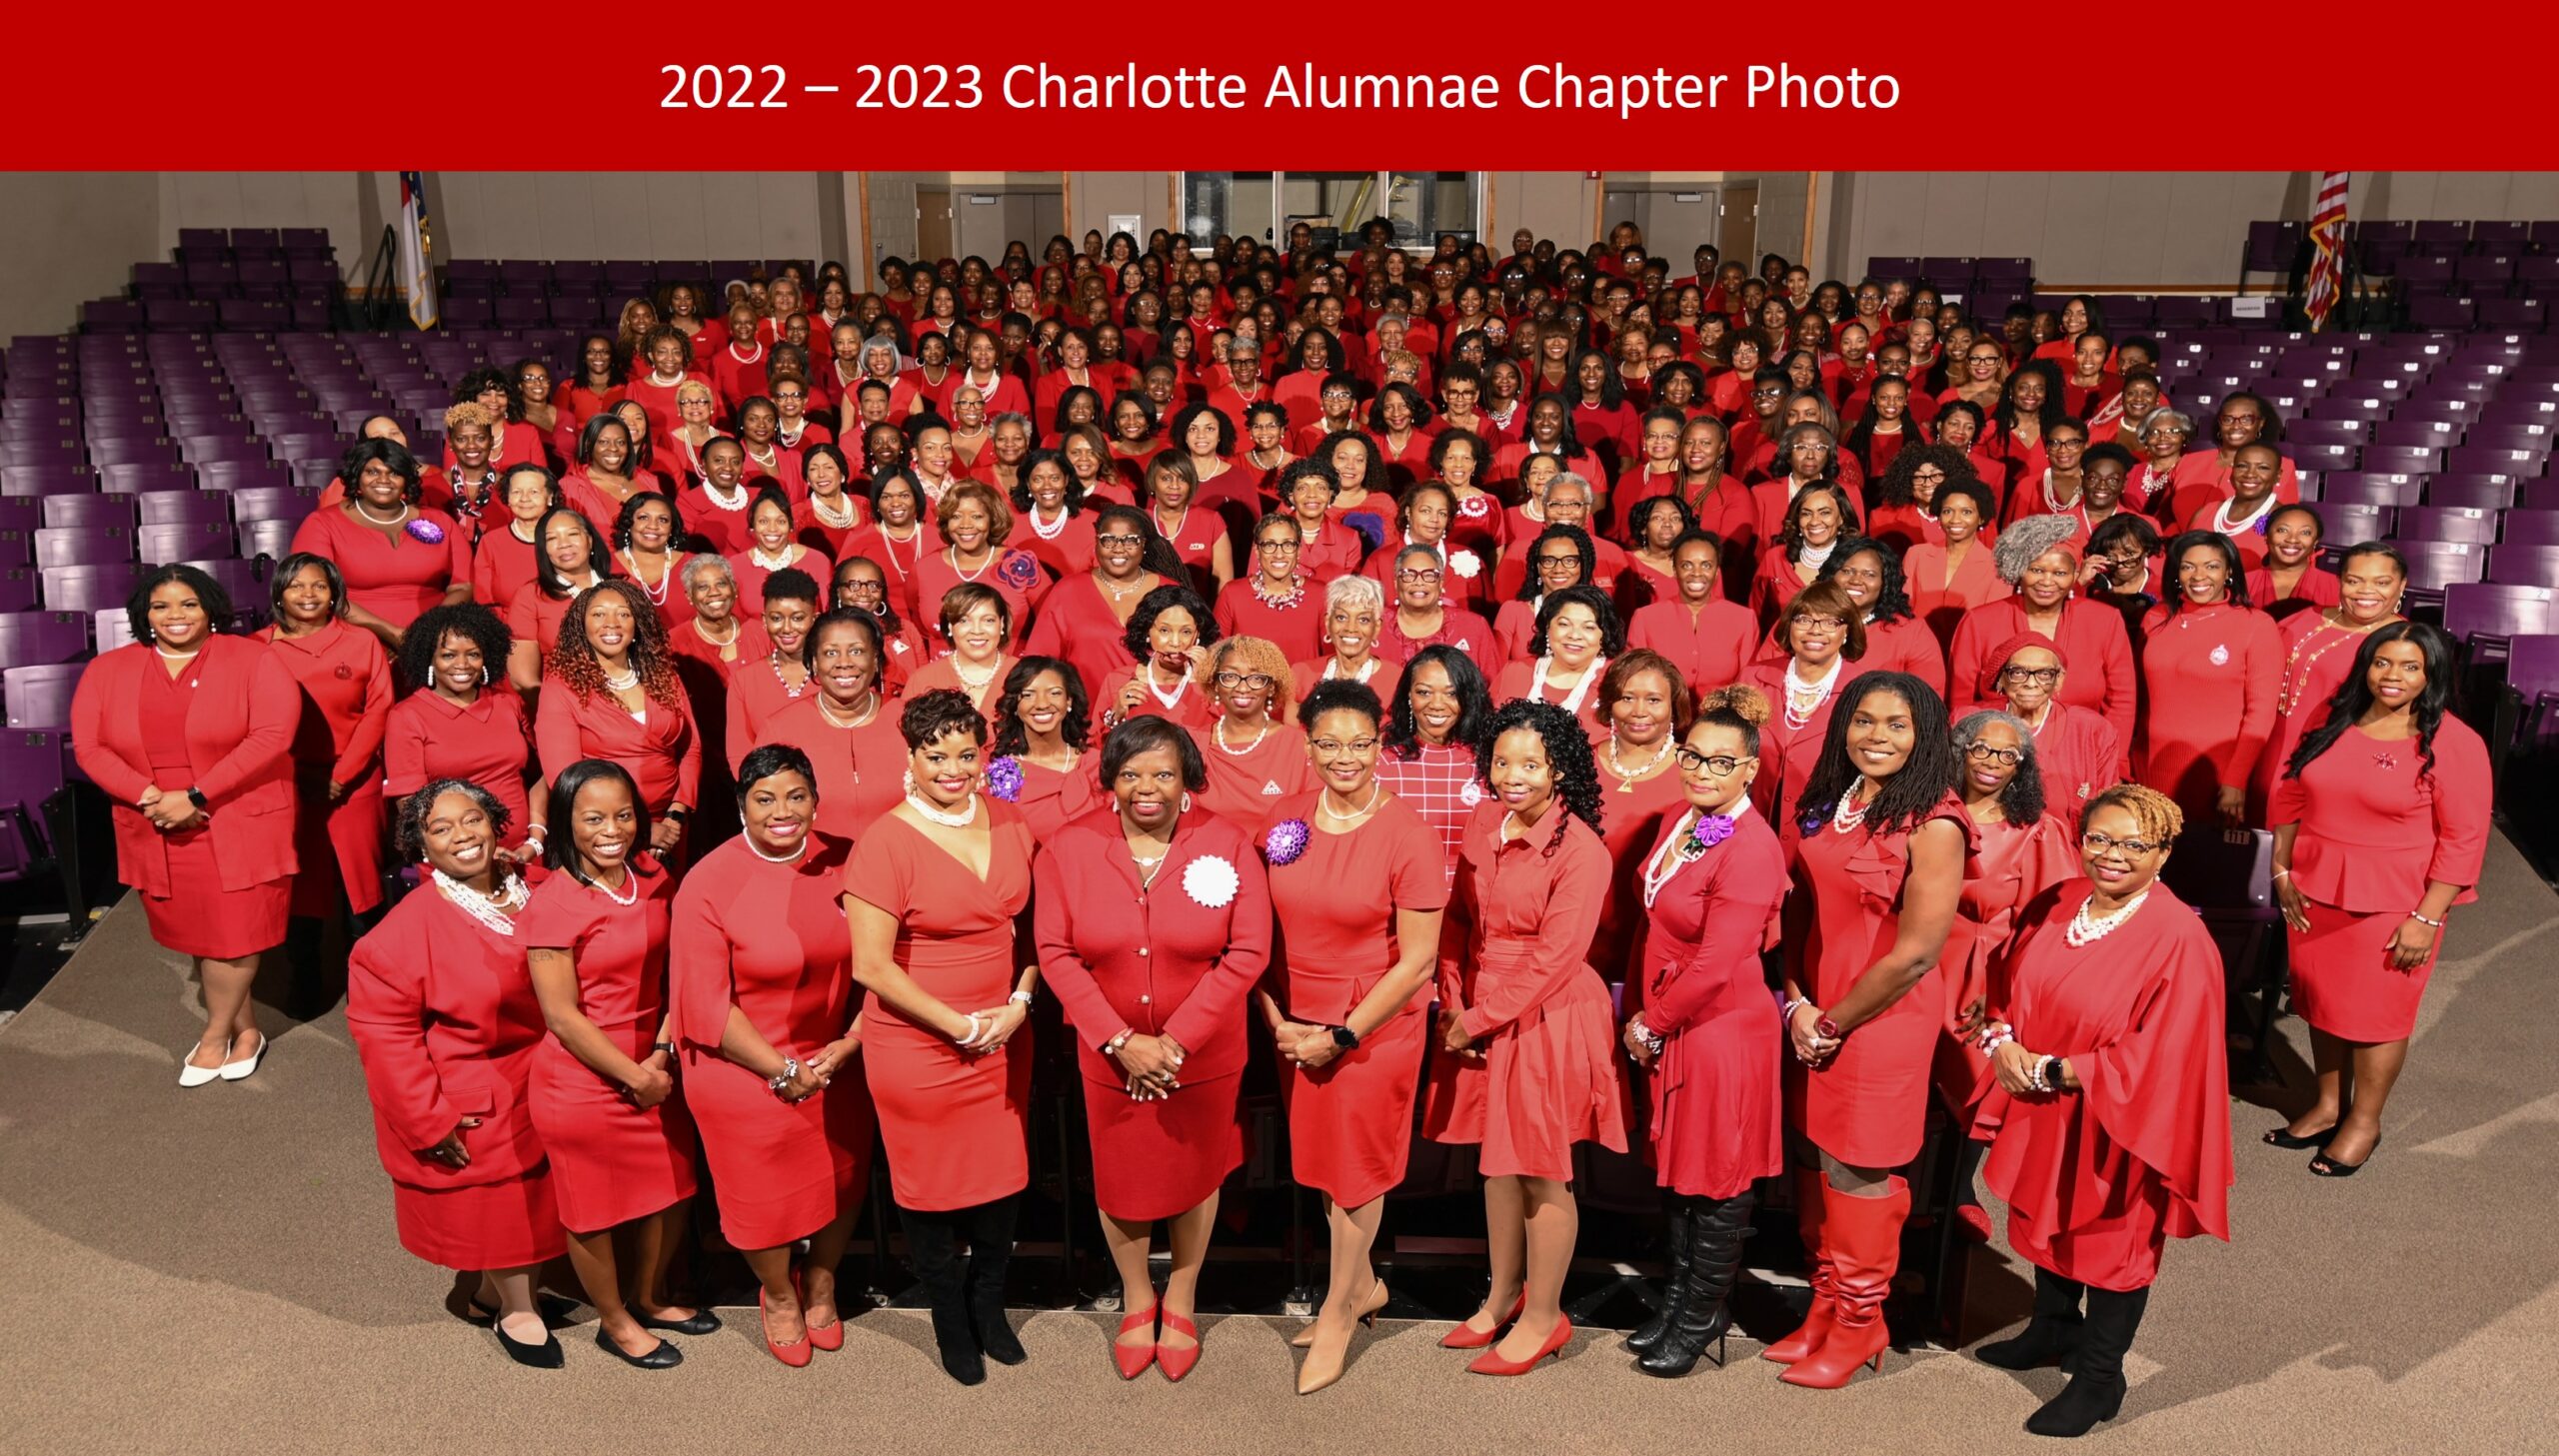 Charlotte Alumnae Chapter group photo at a chapter activity